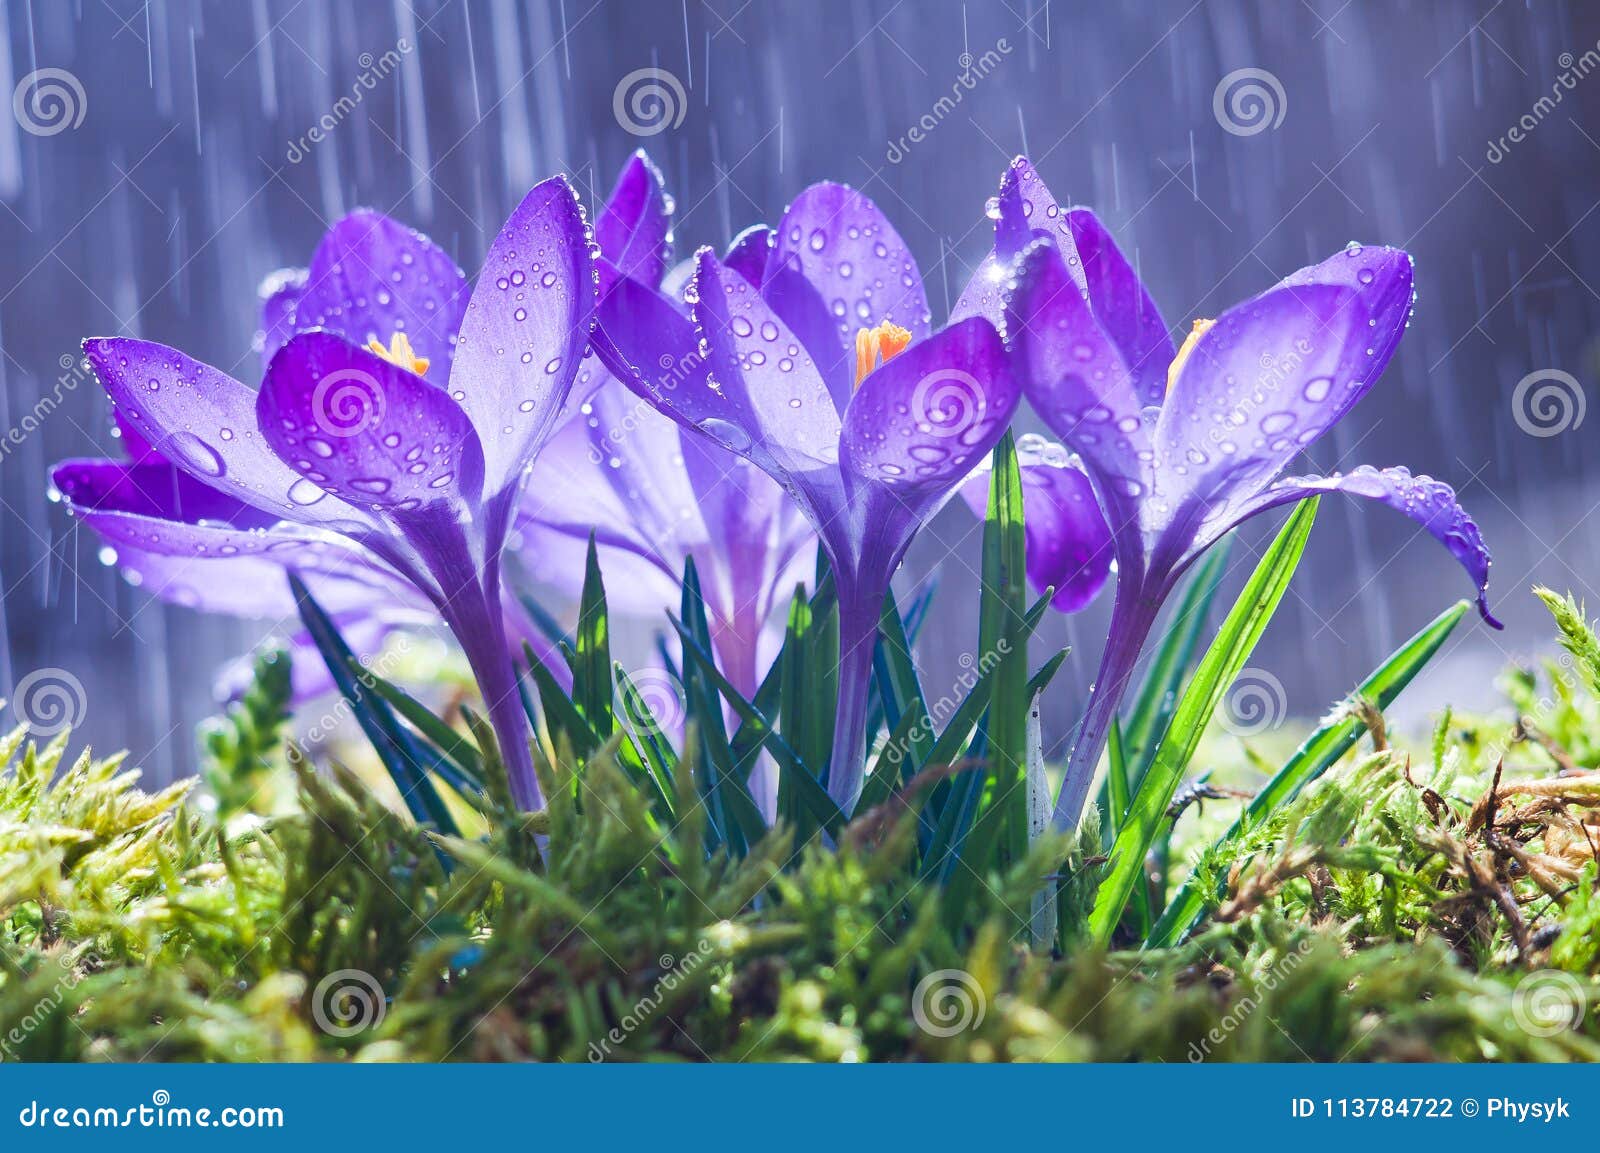 spring flowers of blue crocuses in drops of water on the background of tracks of rain drops